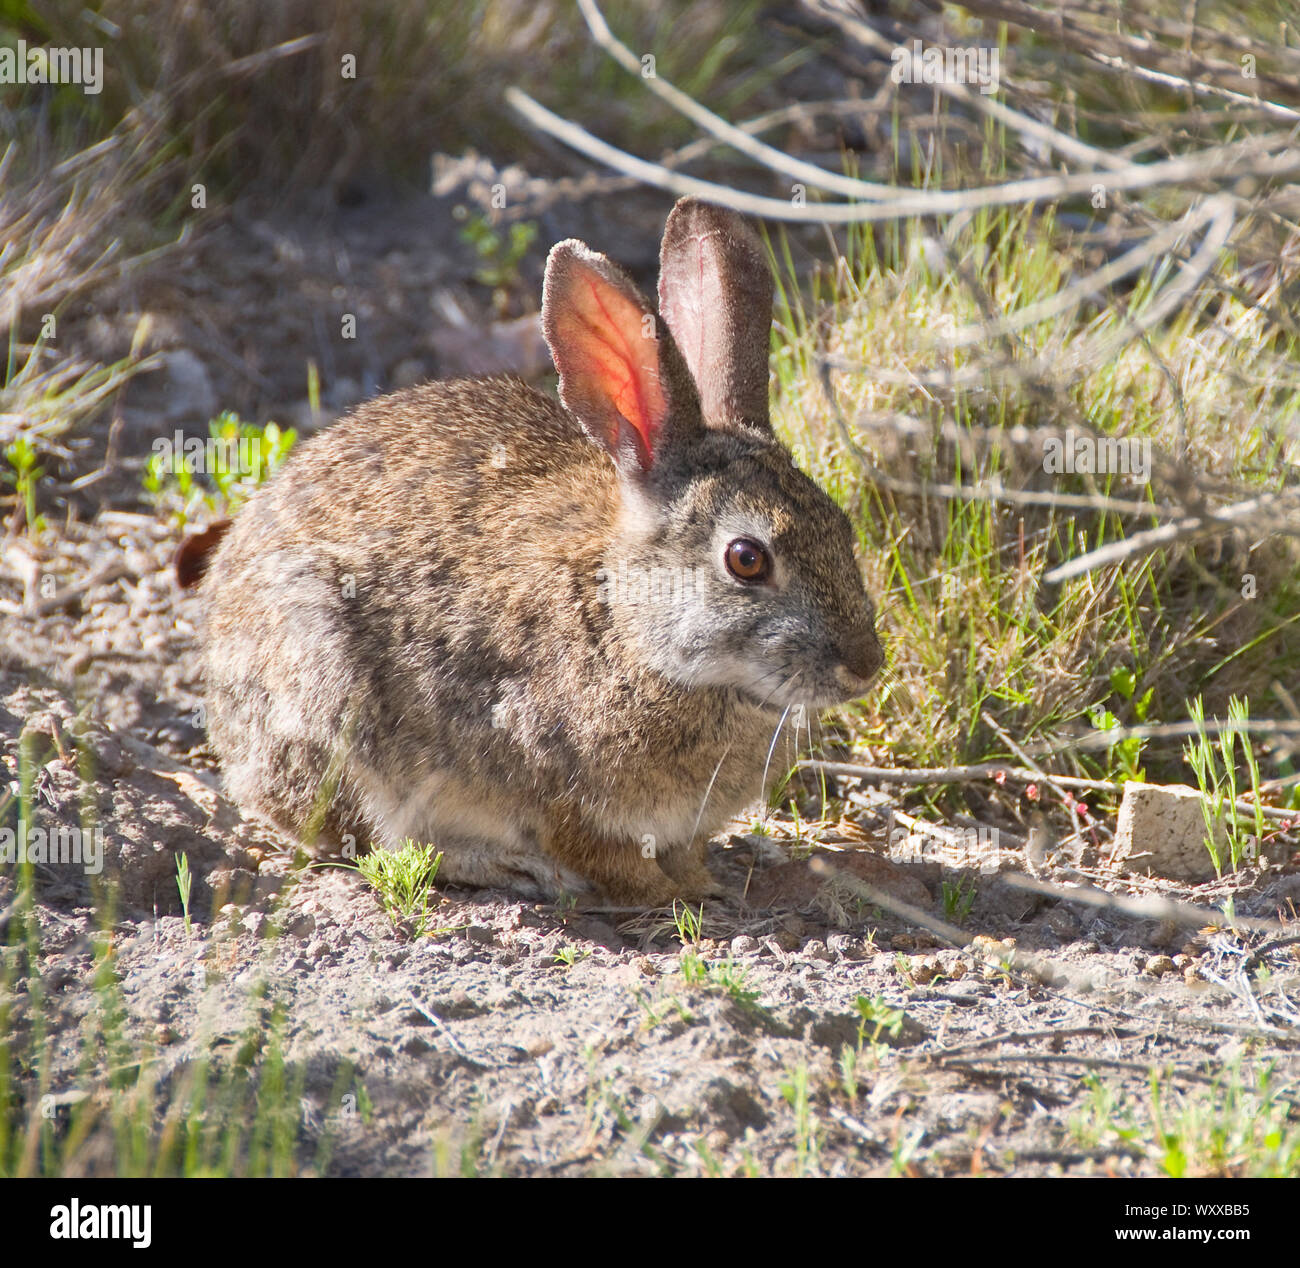 Brush Rabbit. The Brush Rabbit (Sylvilagus bachmani) is also known as Western Brush Rabbit or California Brush Rabbit. It is a species of cottontail r Stock Photo